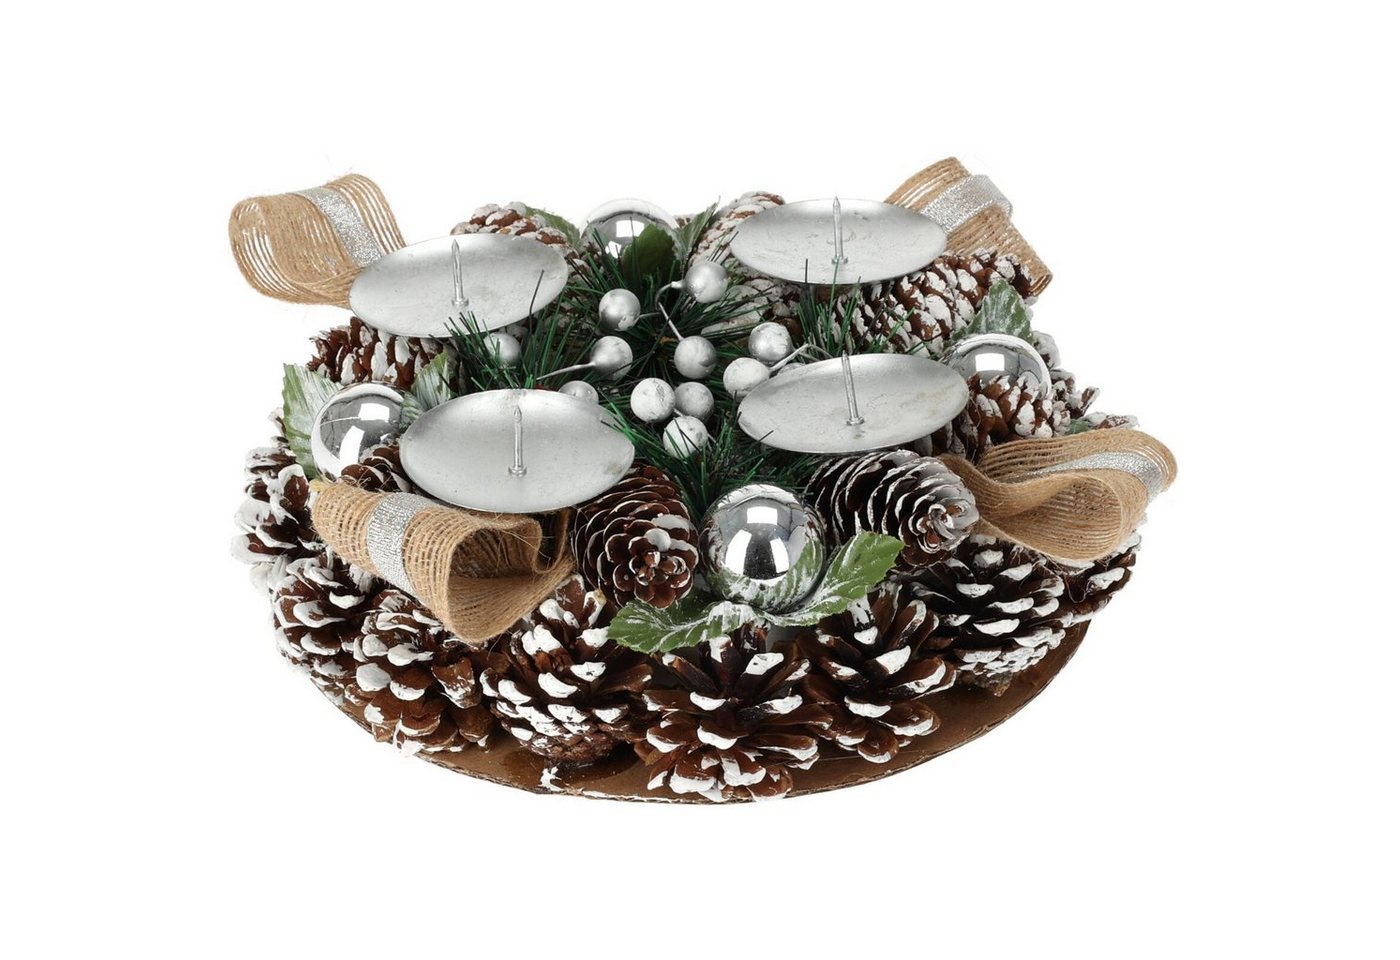 Home & styling collection Adventskranz von Home & styling collection